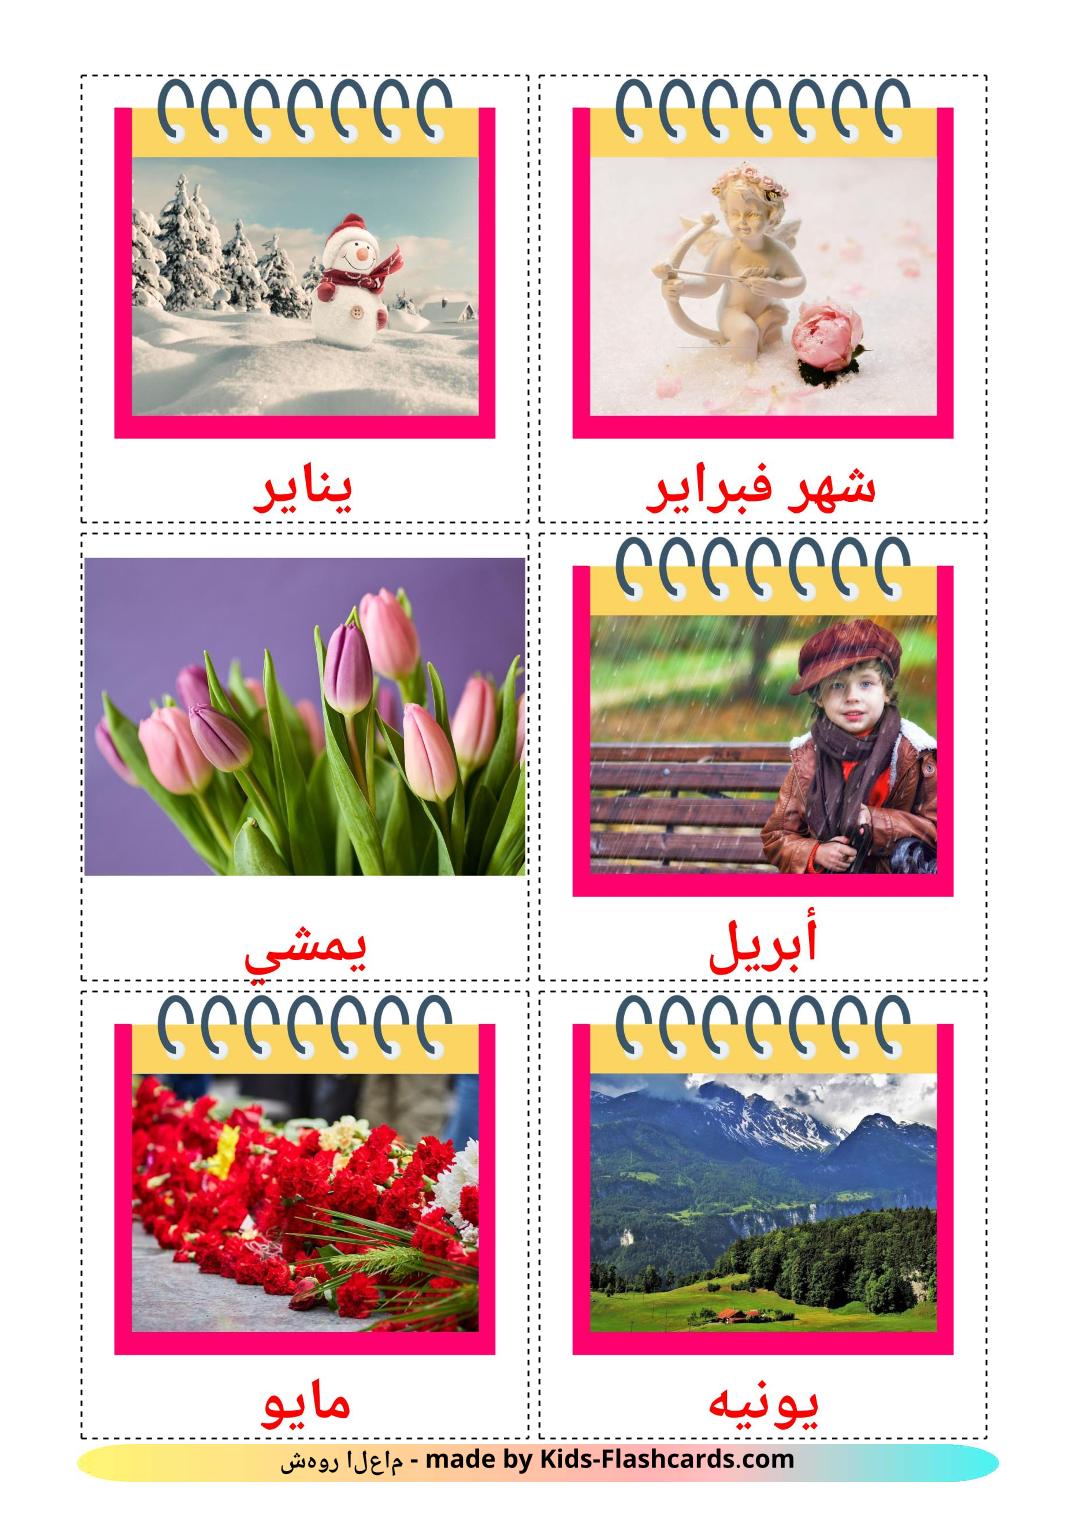 Months of the Year - 12 Free Printable arabic Flashcards 